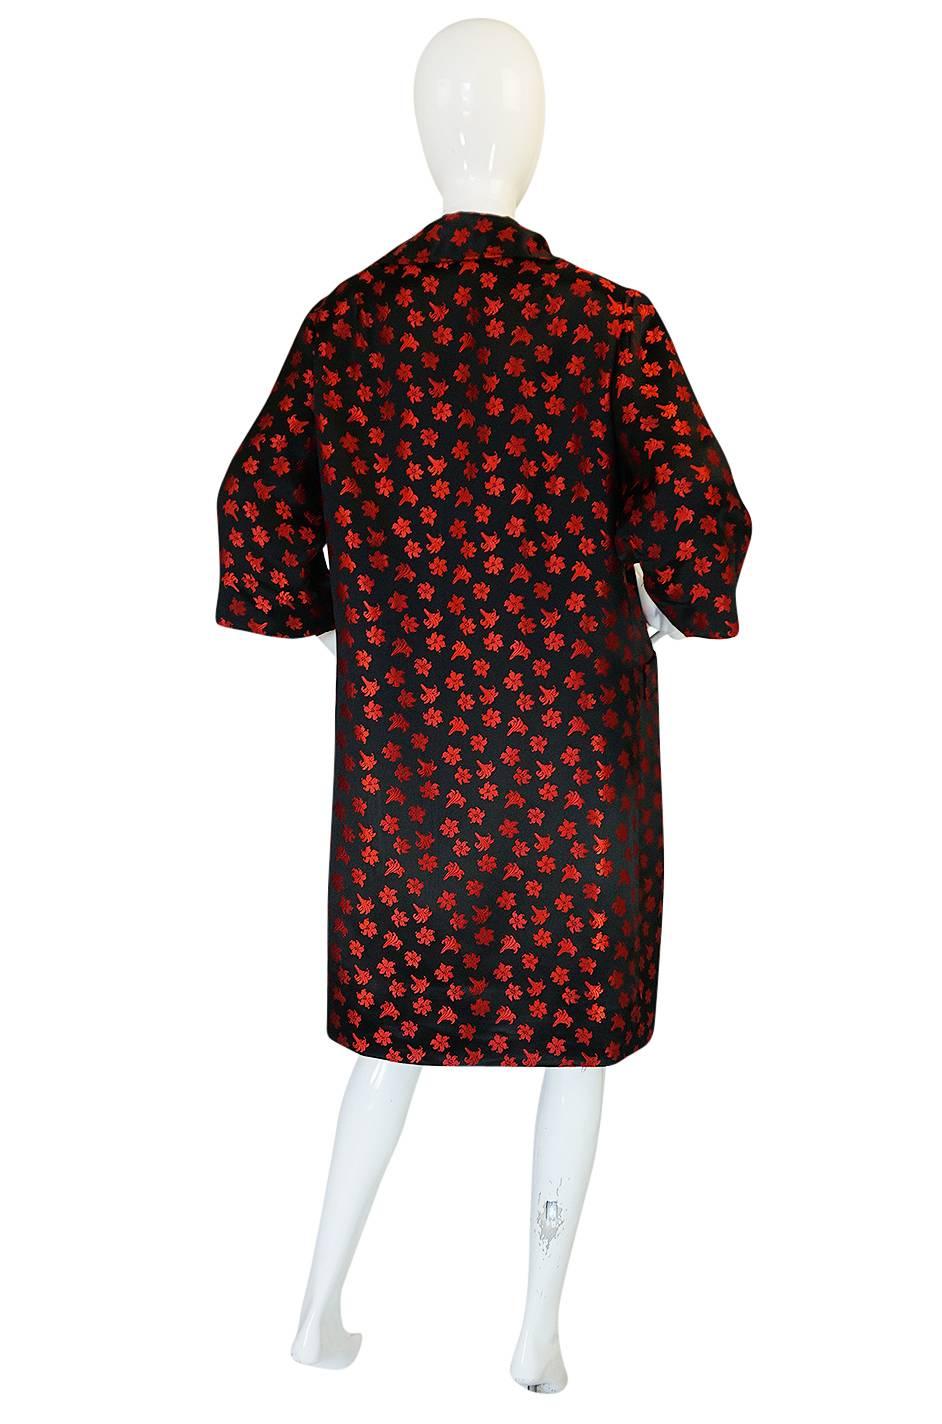 This matches the dress listed today and is a beautiful 1950s swing coat. It is made from a very fine, high end silk. The silk has a beautiful red thread woven through and used in the black silk base to create the beautiful little floral designs